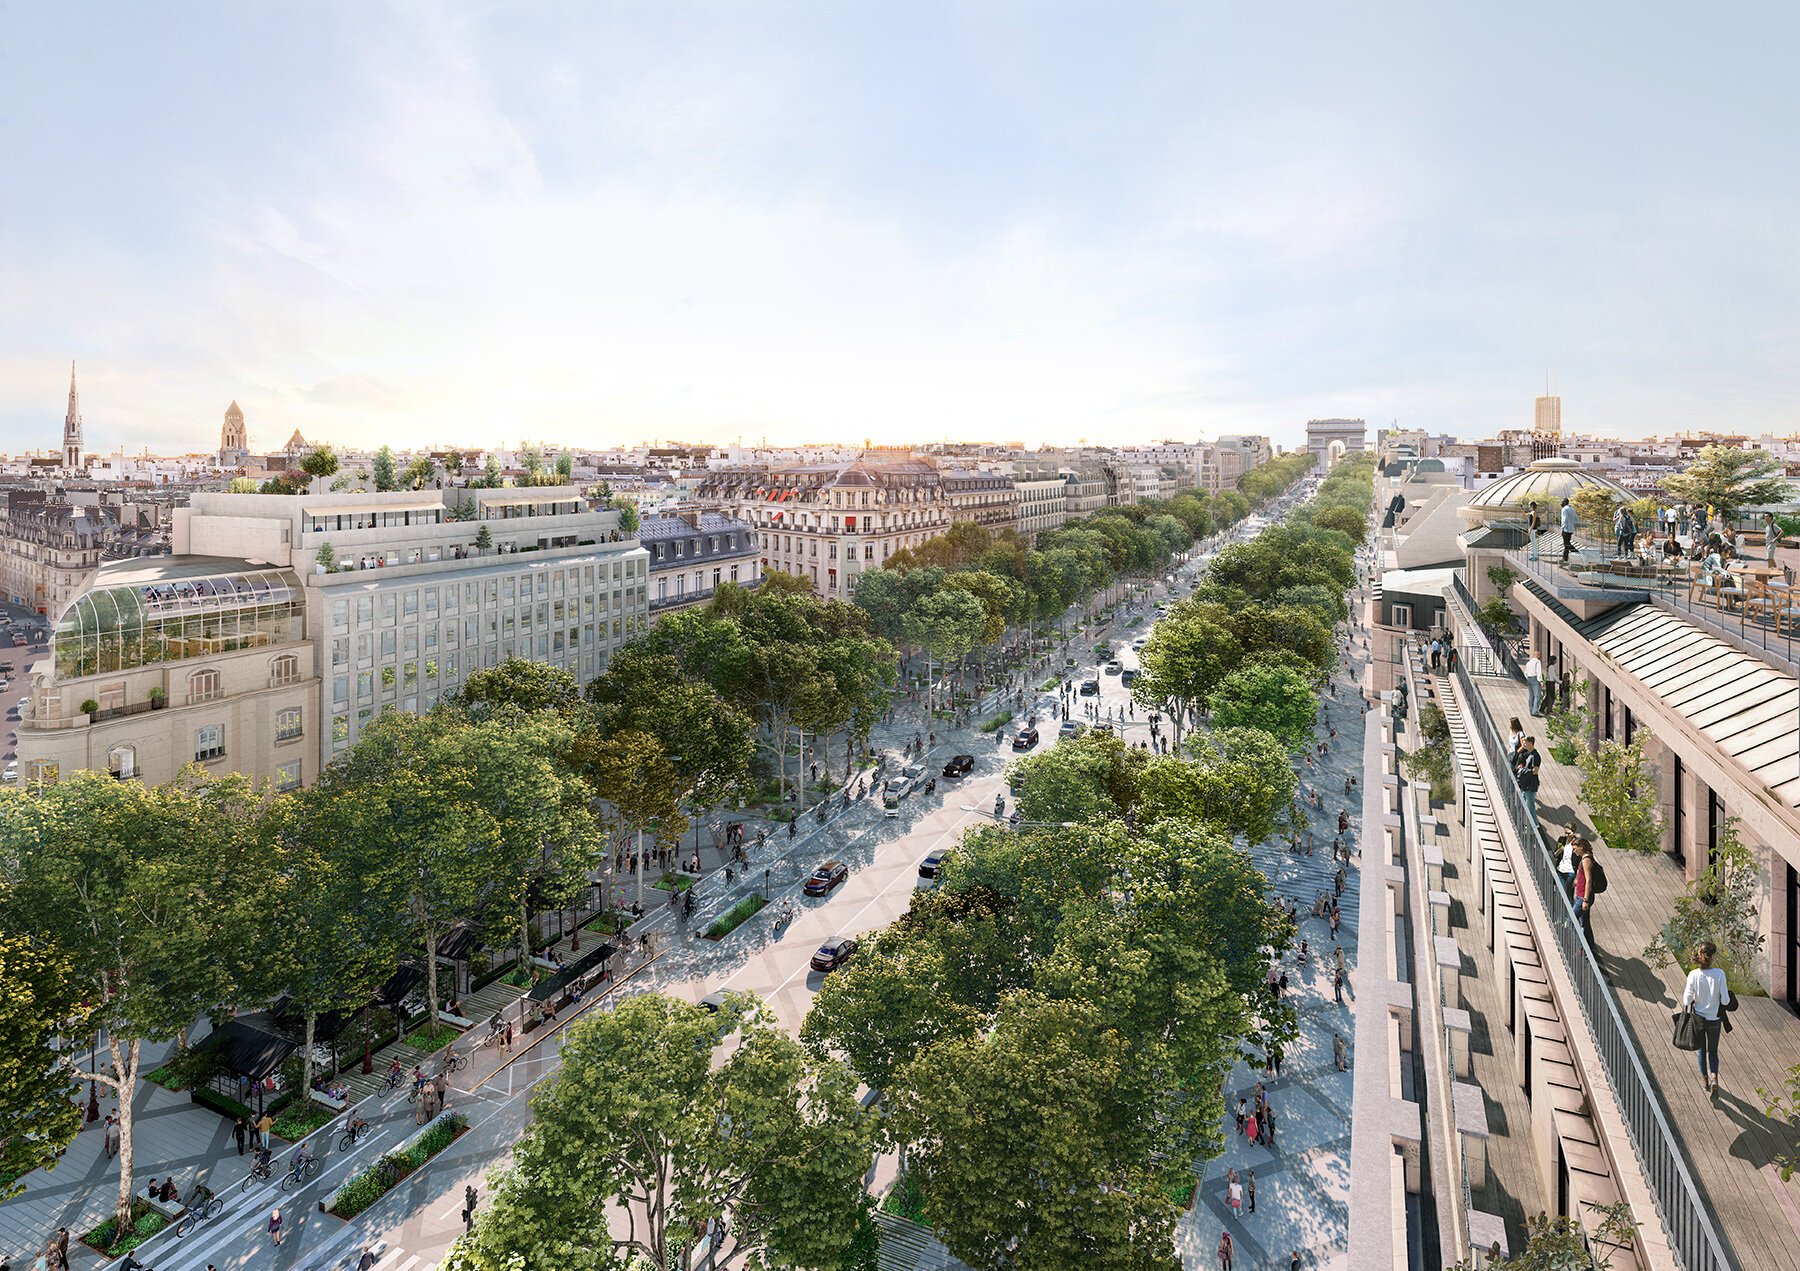 For instance, recovering soil permeability wherever possible, creating planted ‘lounges’, bioswales, and buffer strips to increase water infiltration and the construction of retention basins where the former ditches of Place de la Concorde lied will filter pollutants and harvest rainwater.